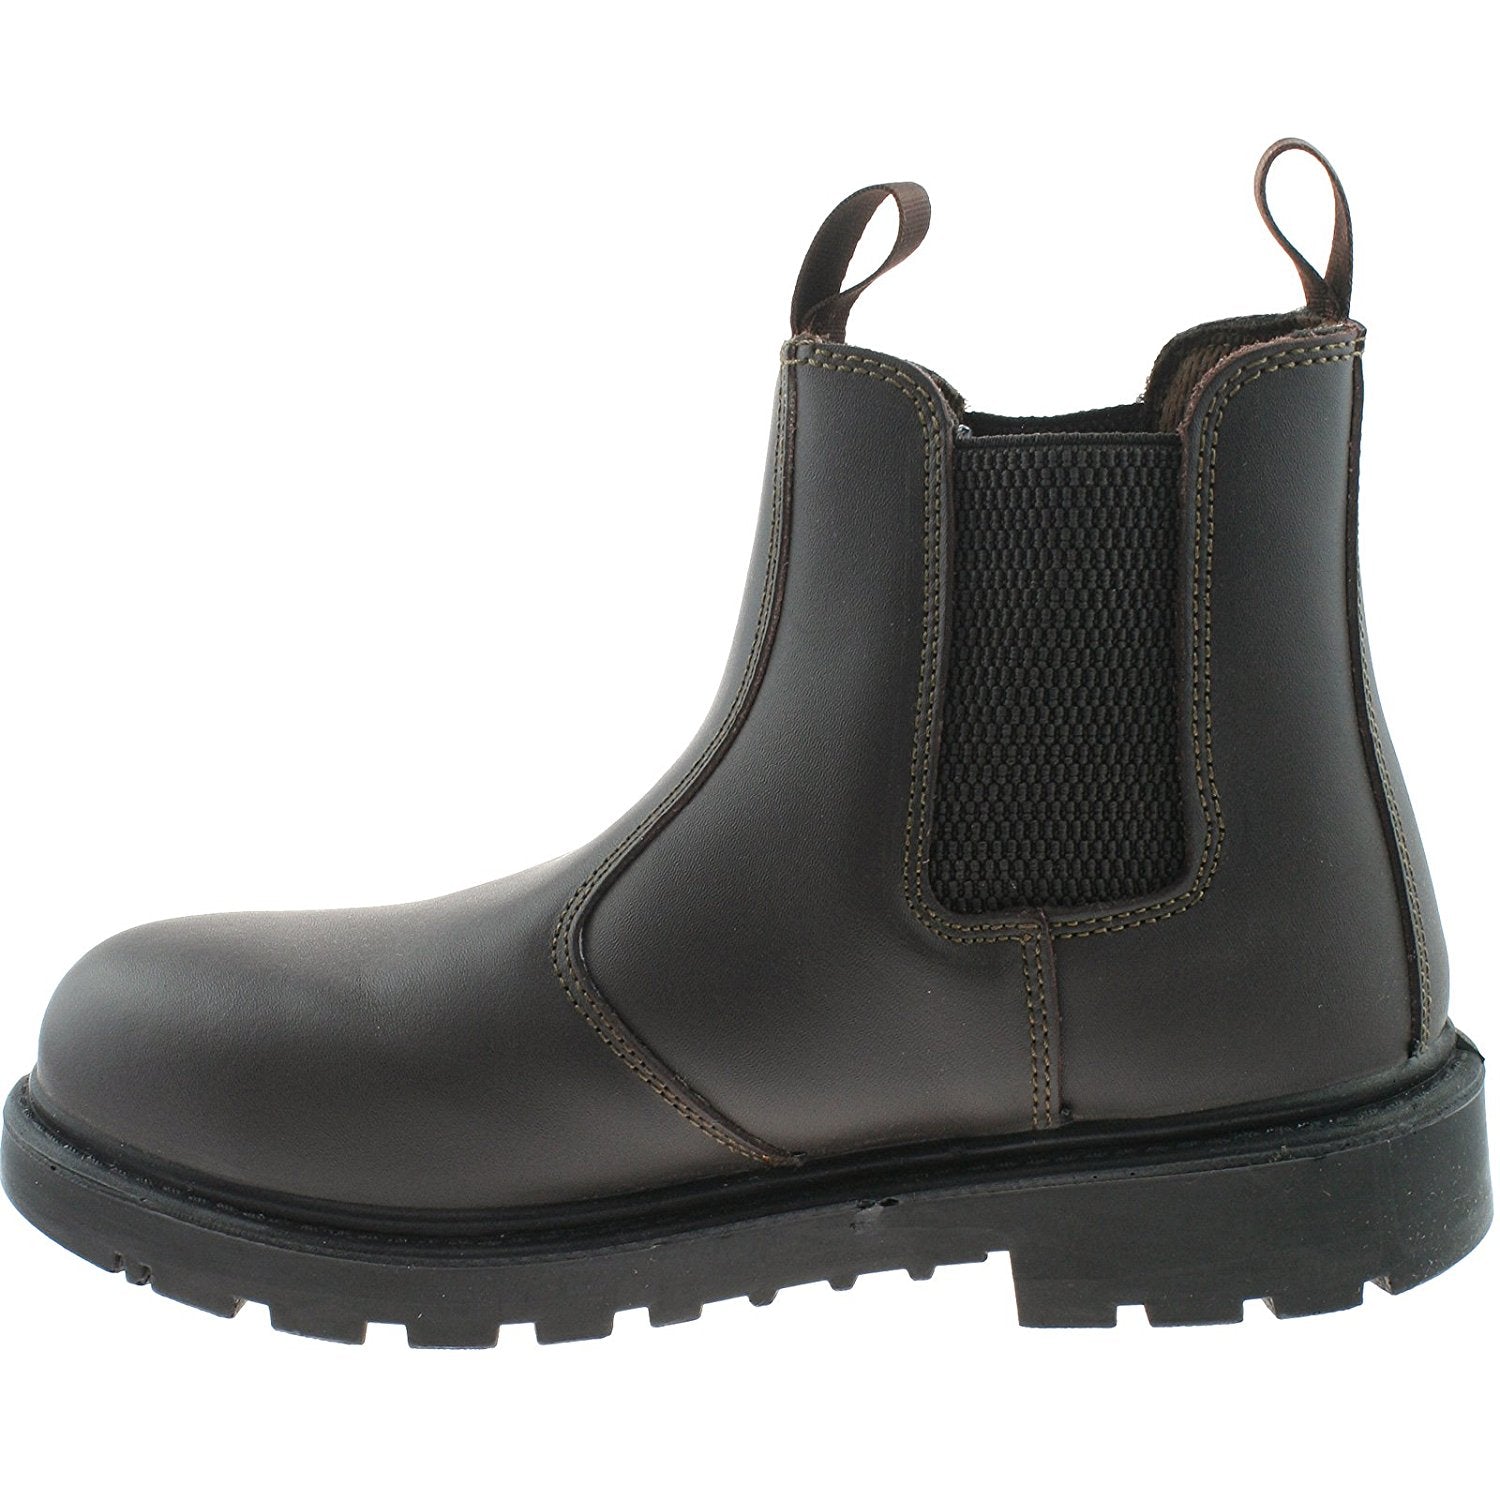 elastic gusset safety boot with steel toe